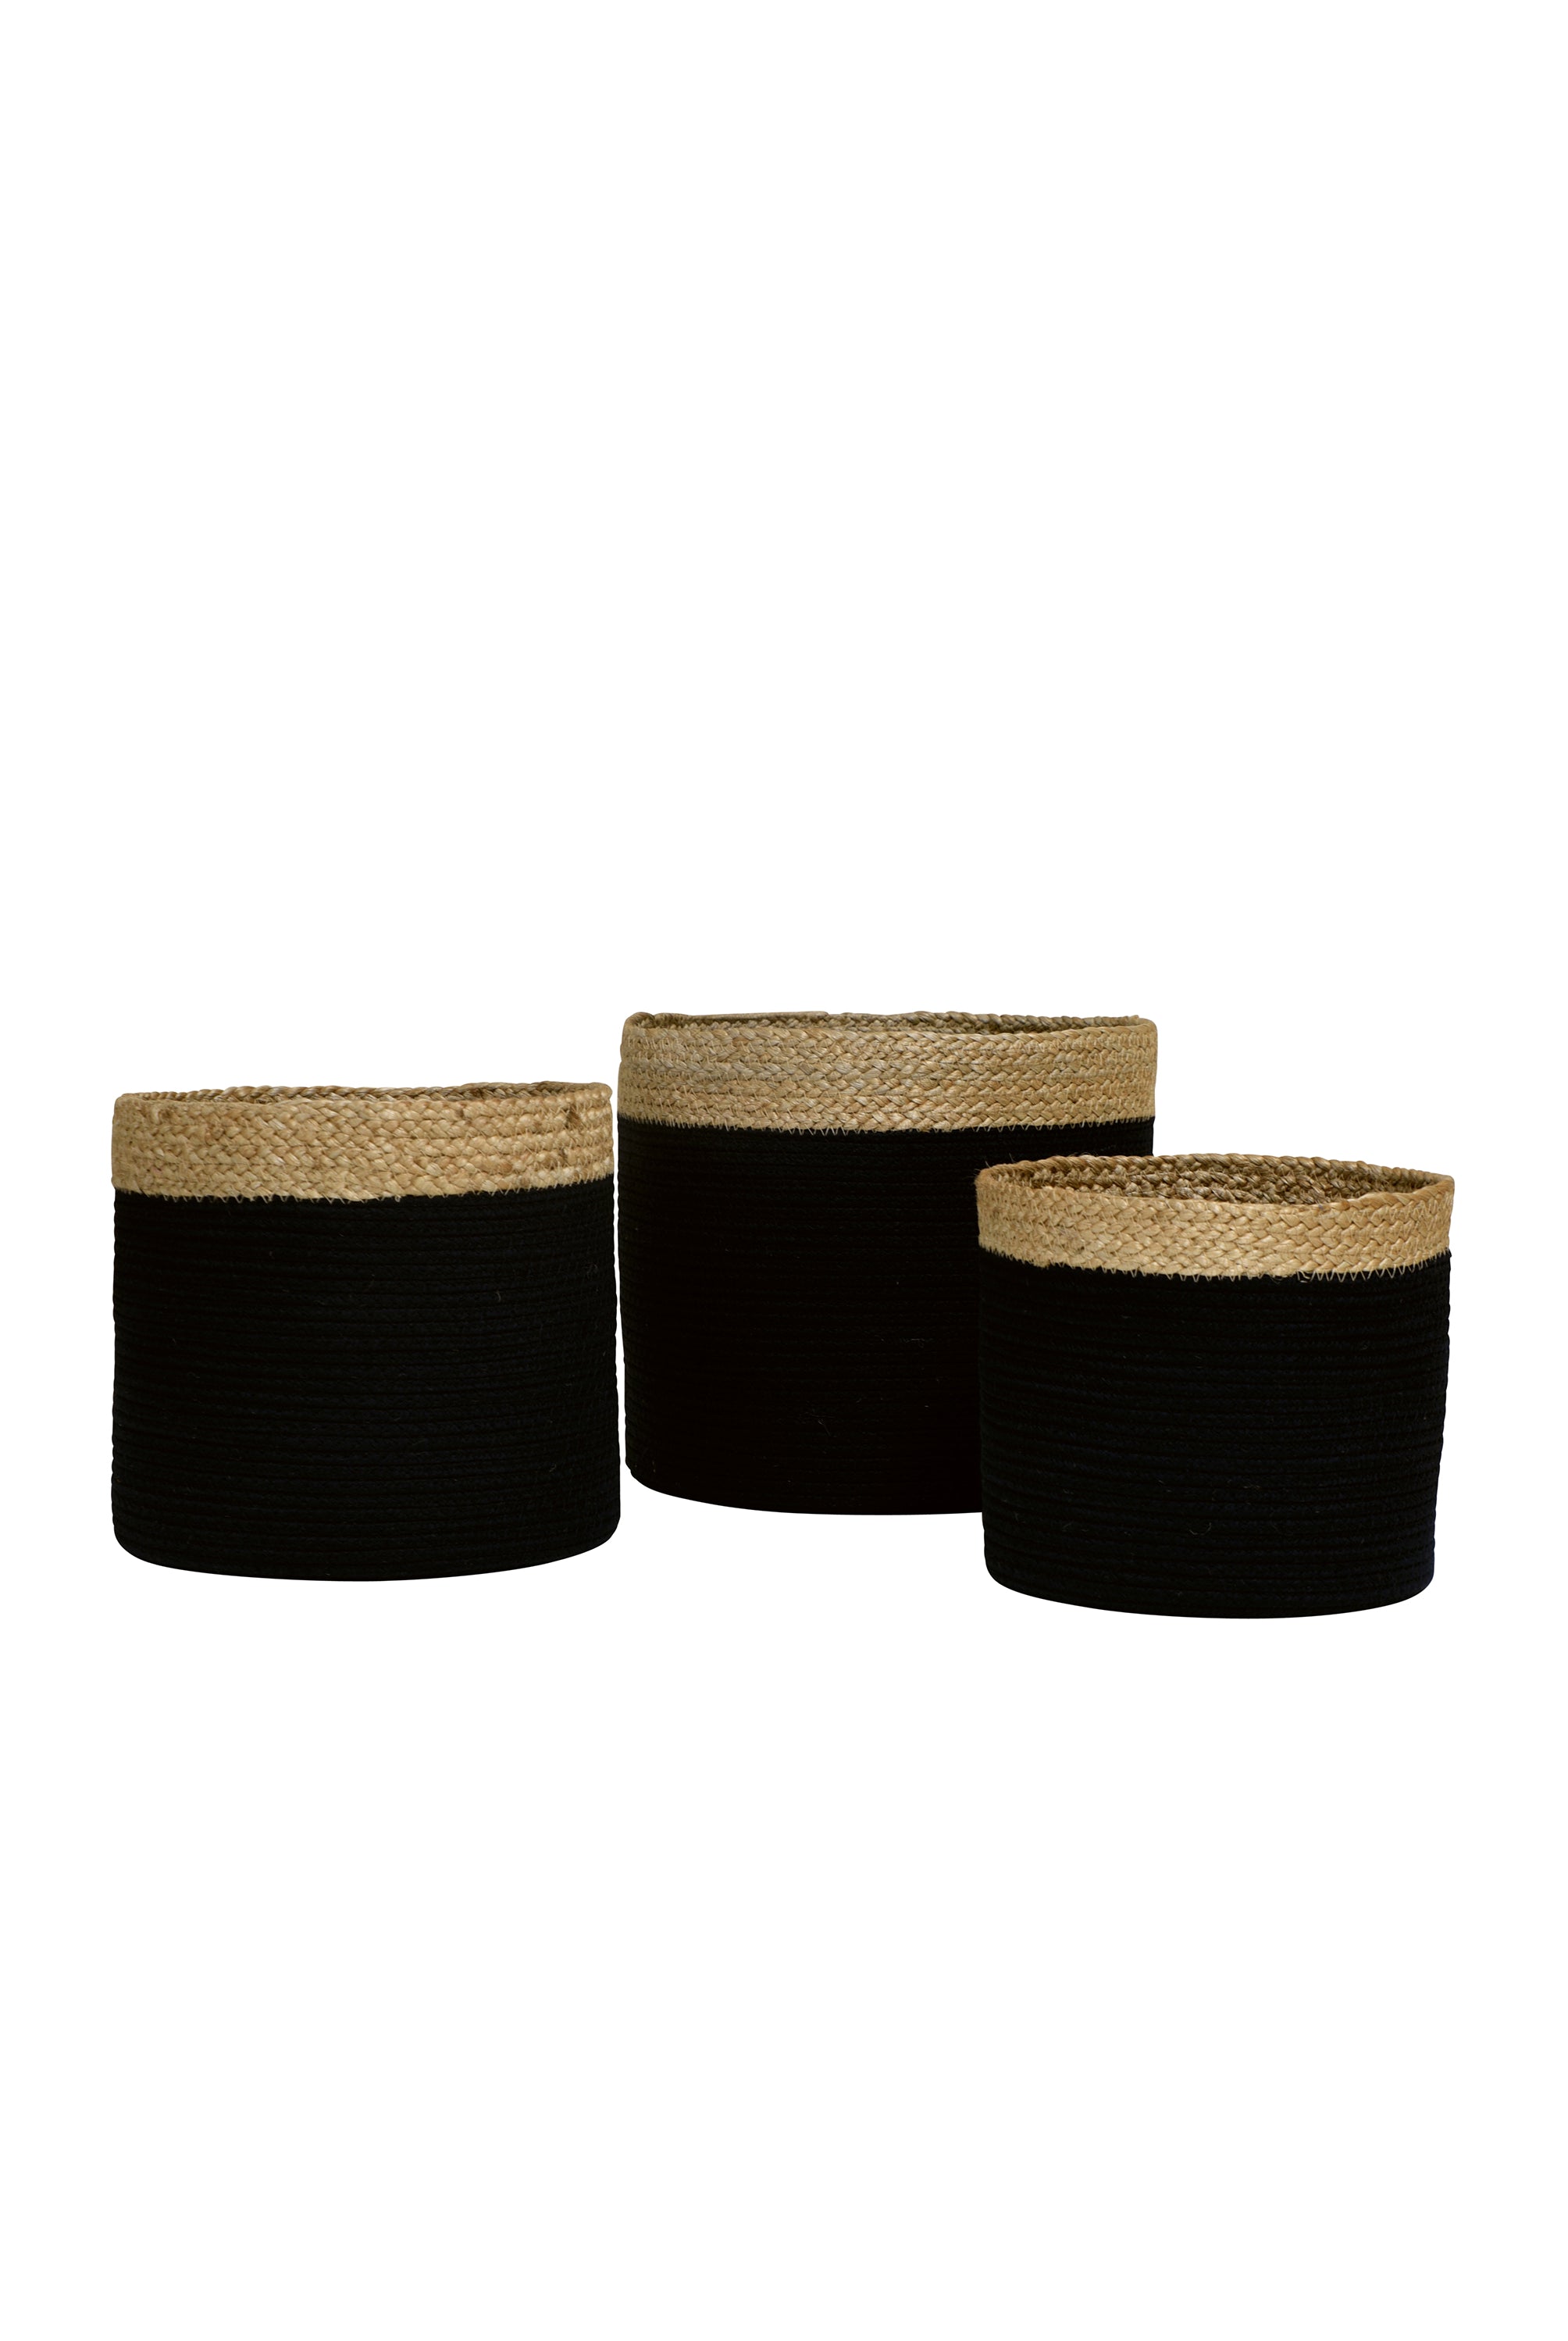 Thick Rimmed Planter Baskets - Set of 3 Black/Natural - Magpie Style